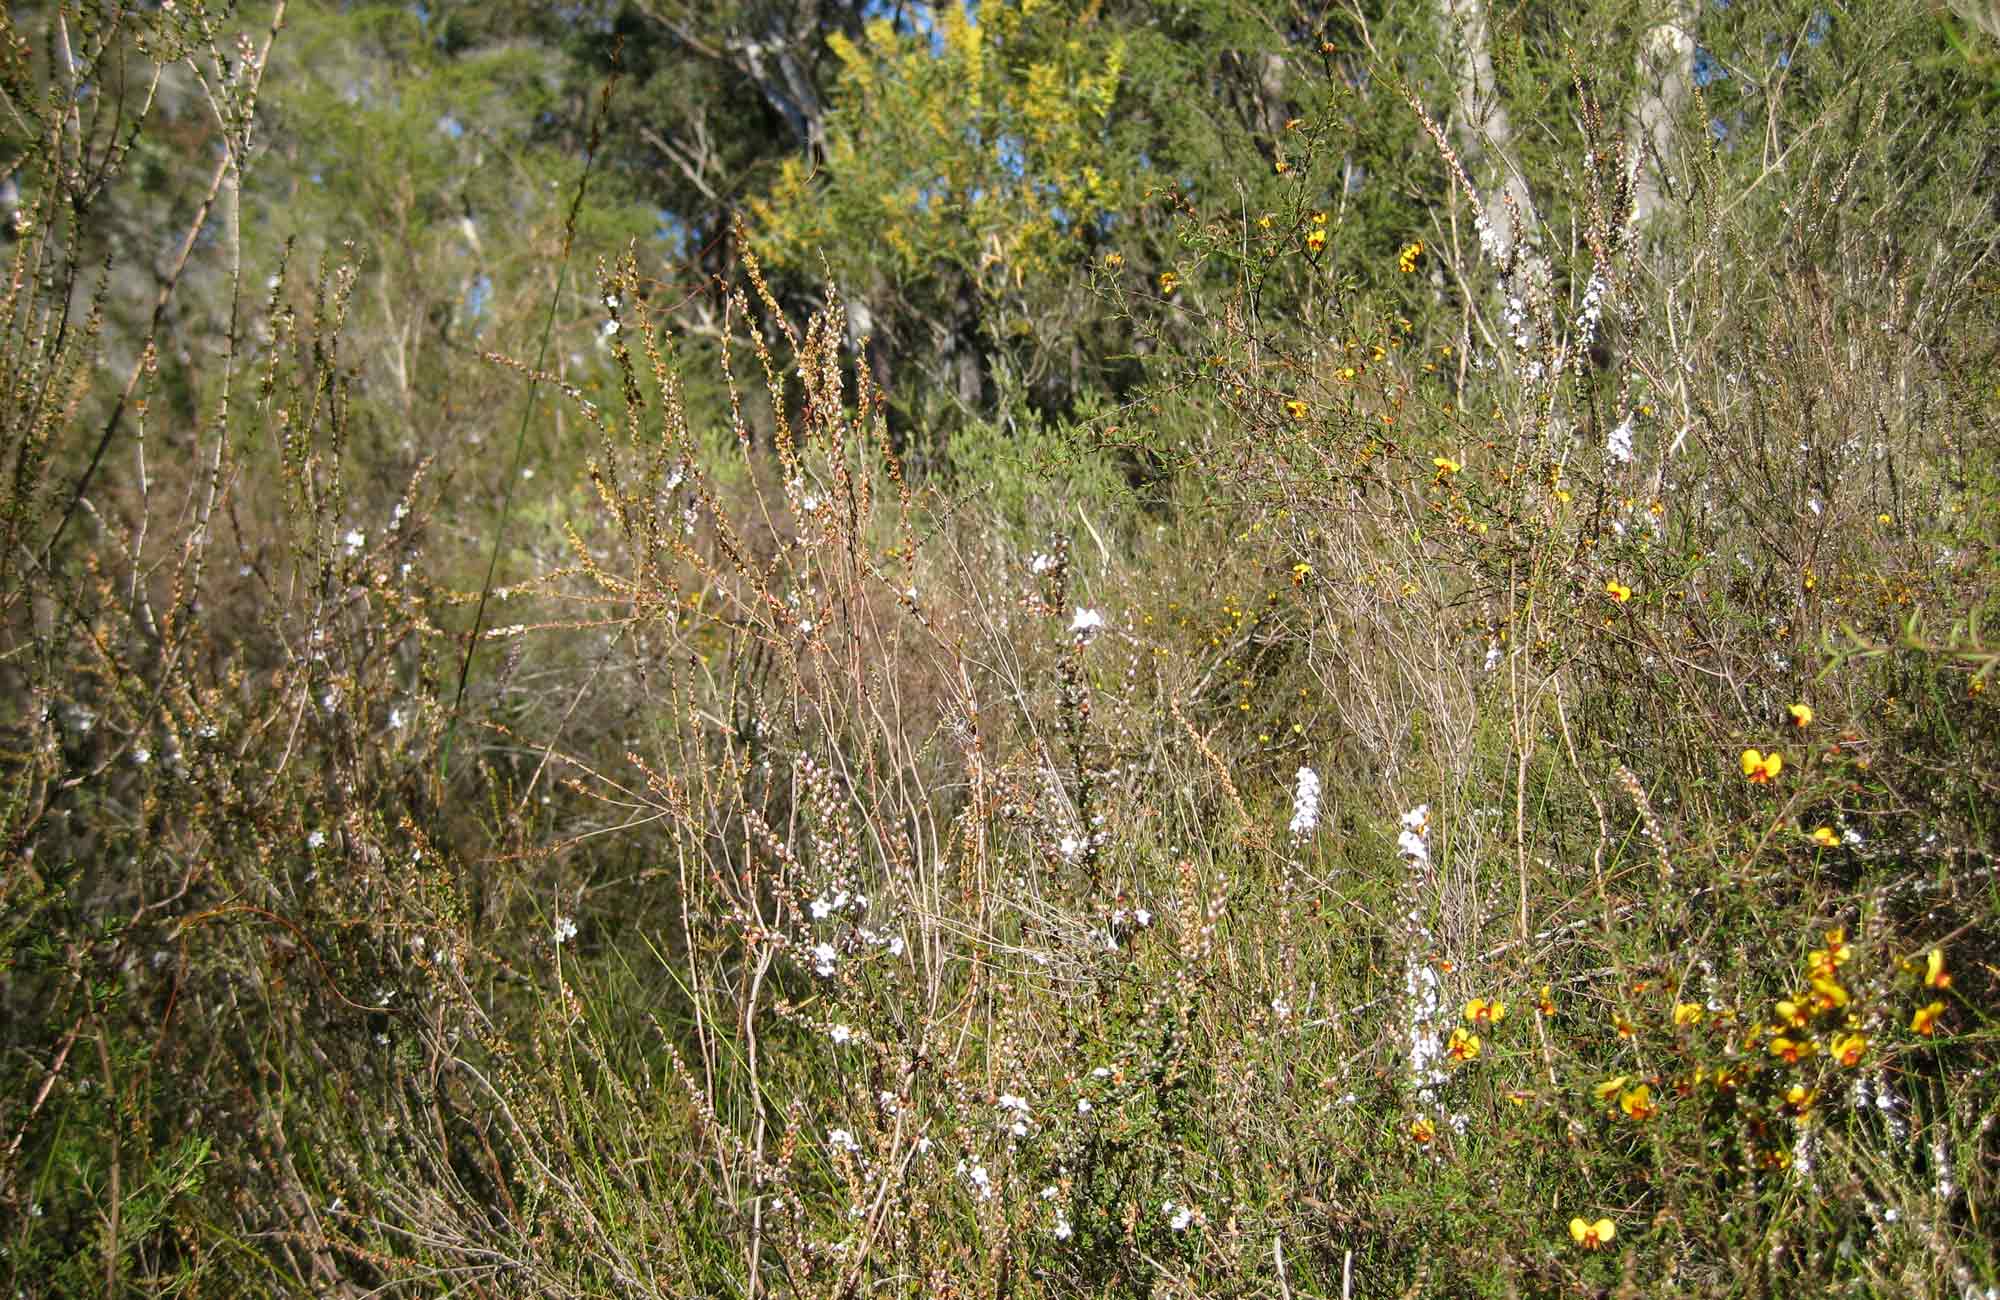 Falcon Crescent plantlife, Bomaderry Creek Regional Park